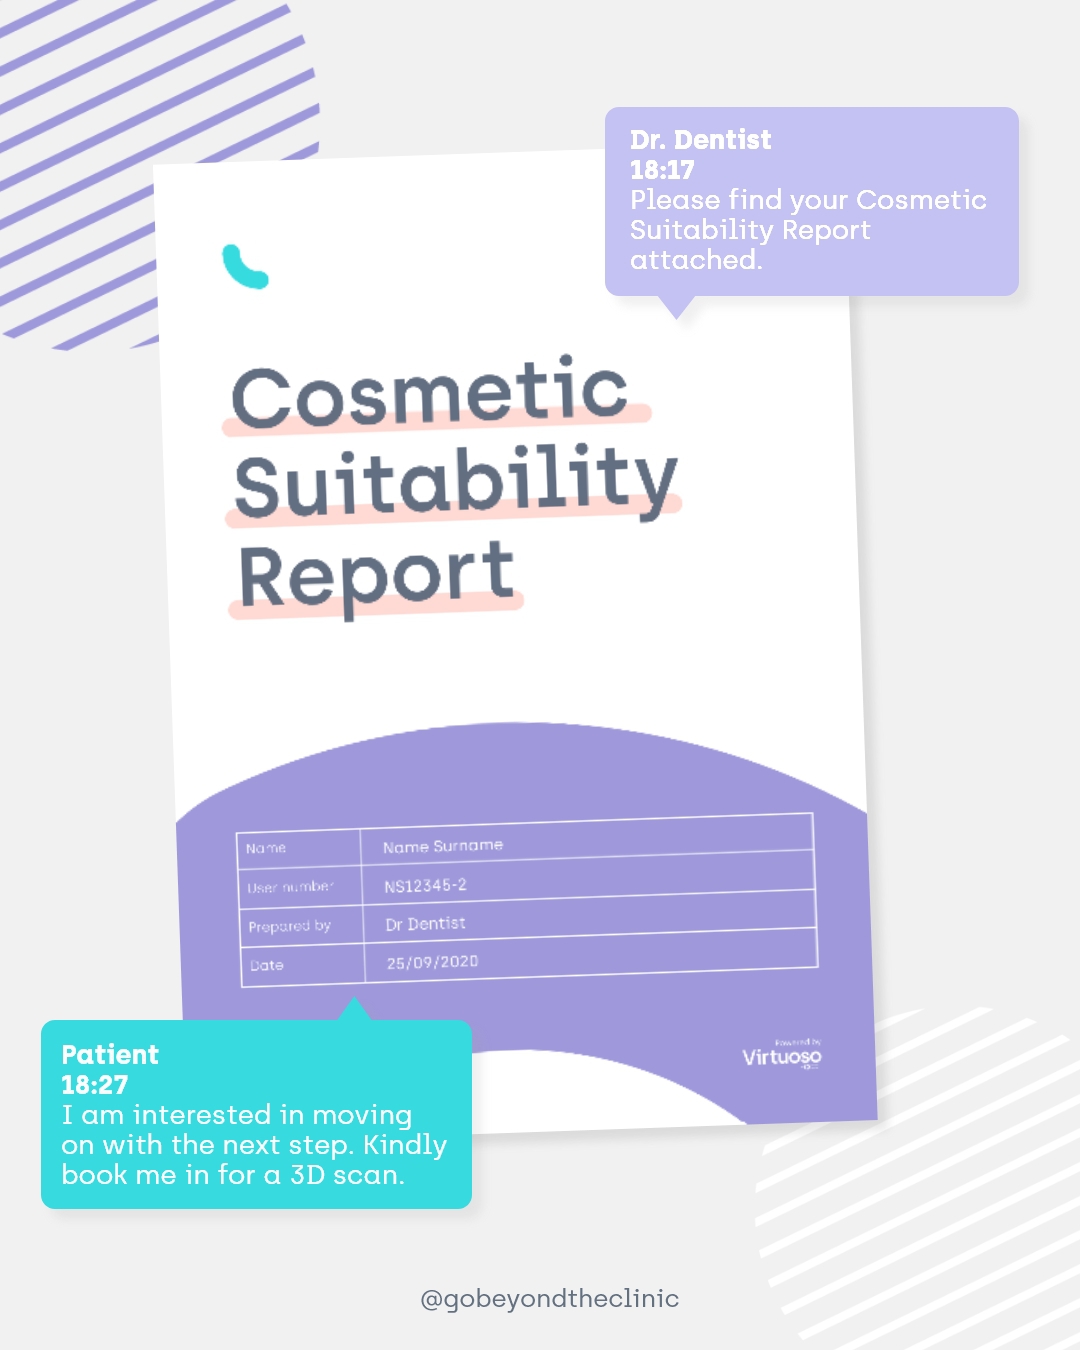 Dental cosmetic suitability report